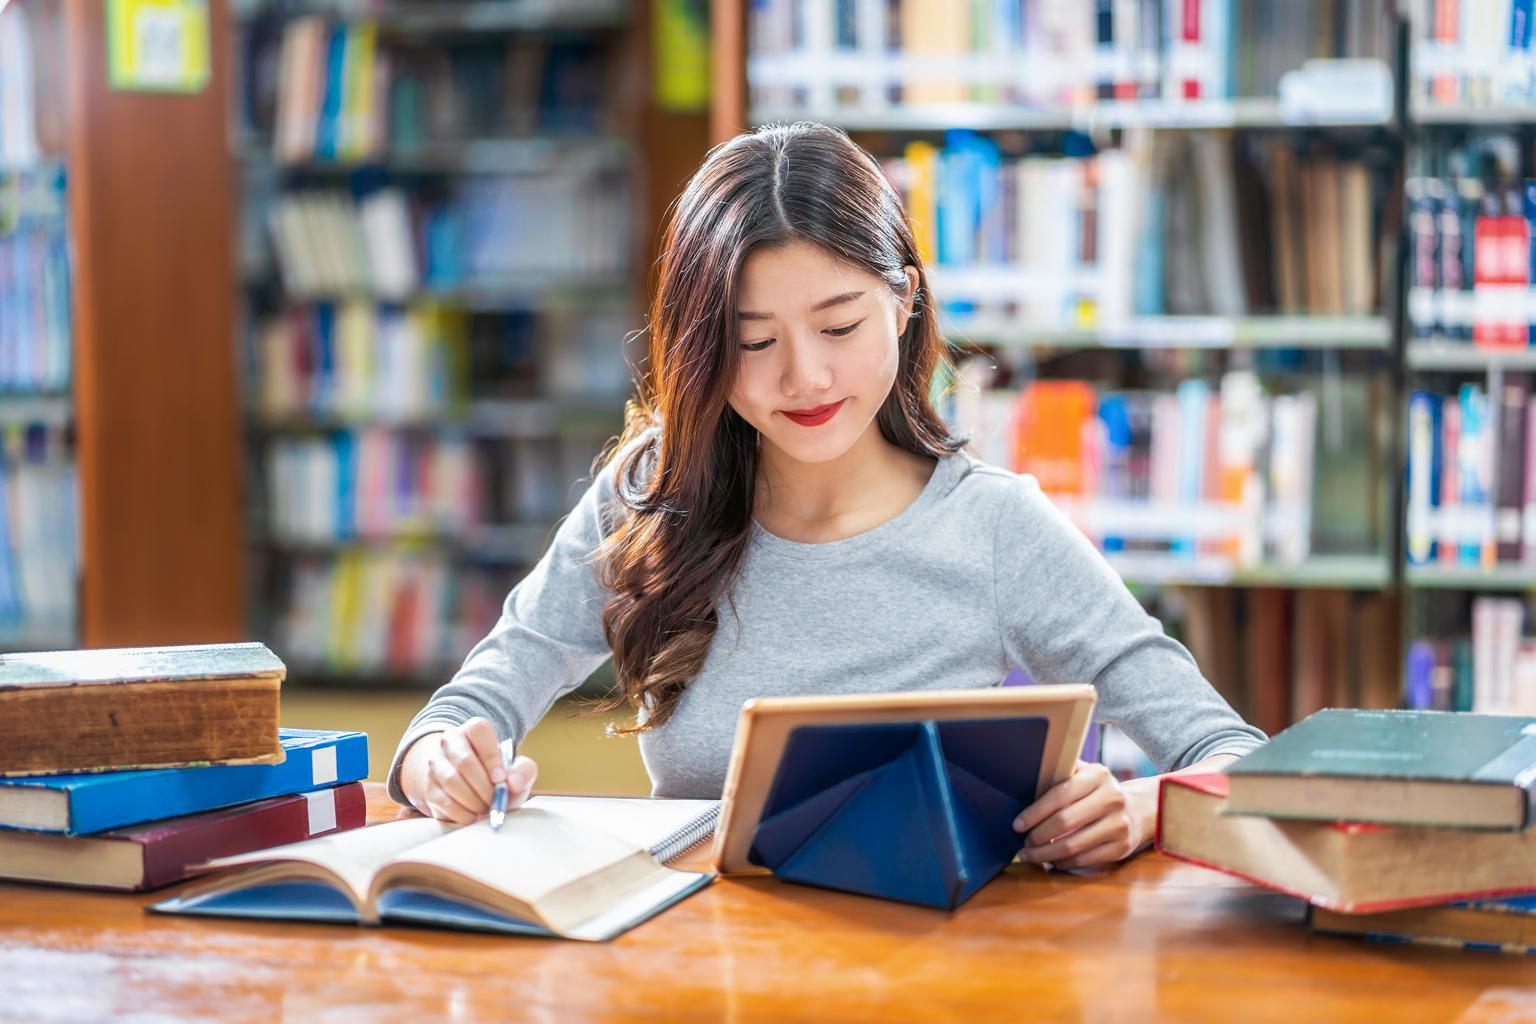 Asian young Student using technology tablet in university library with various books and stationary over the book shelf background